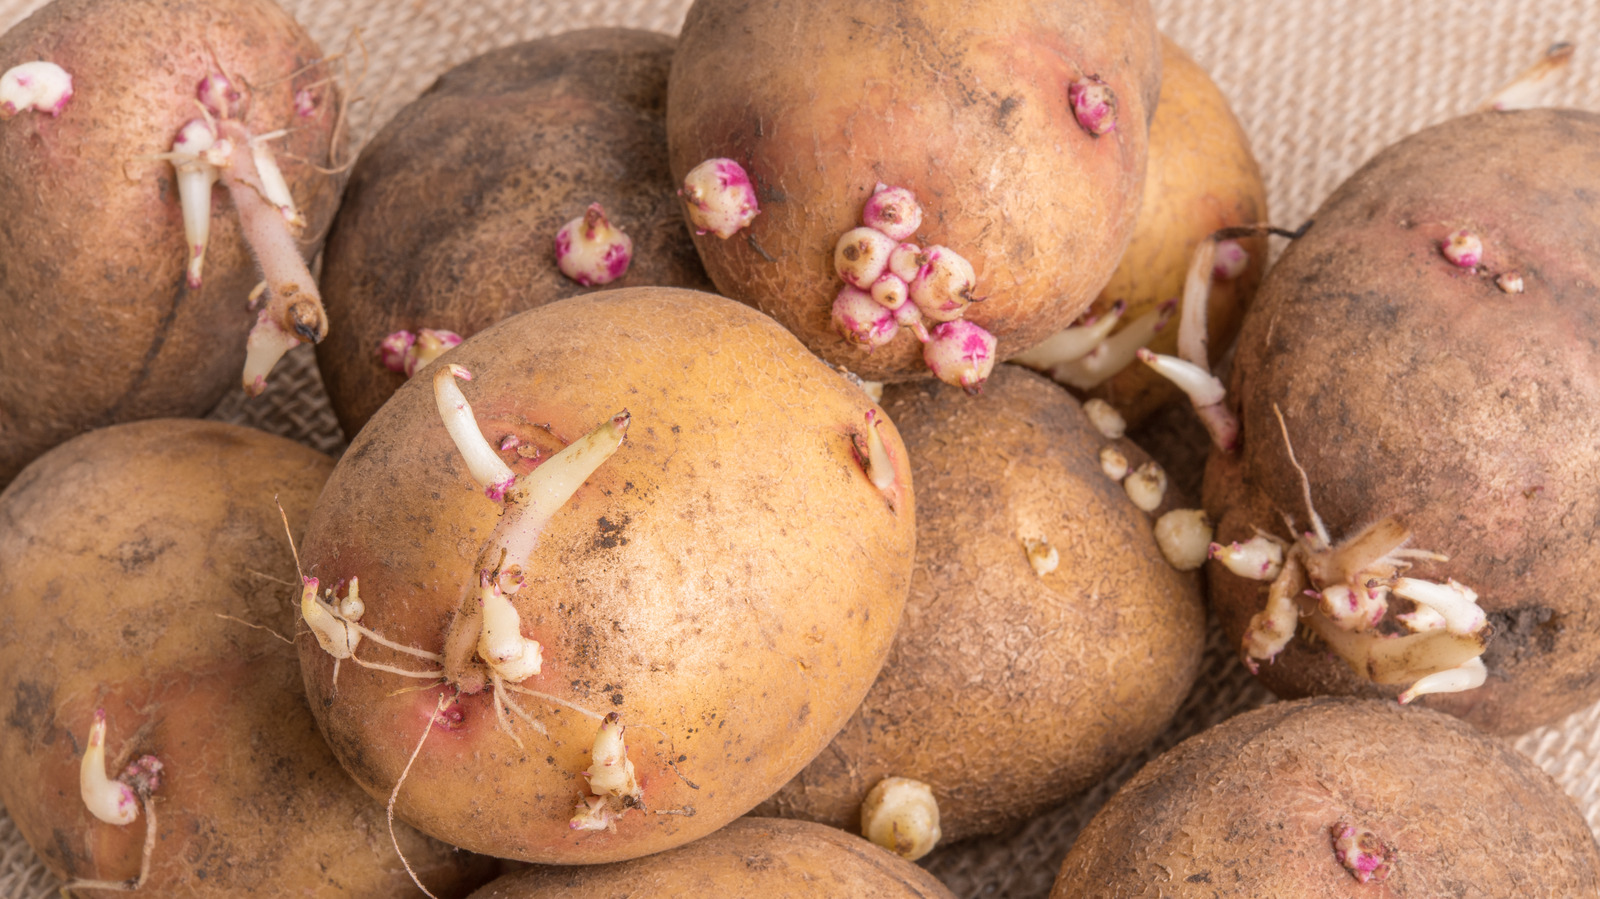 Can You Eat Sprouted Potatoes?